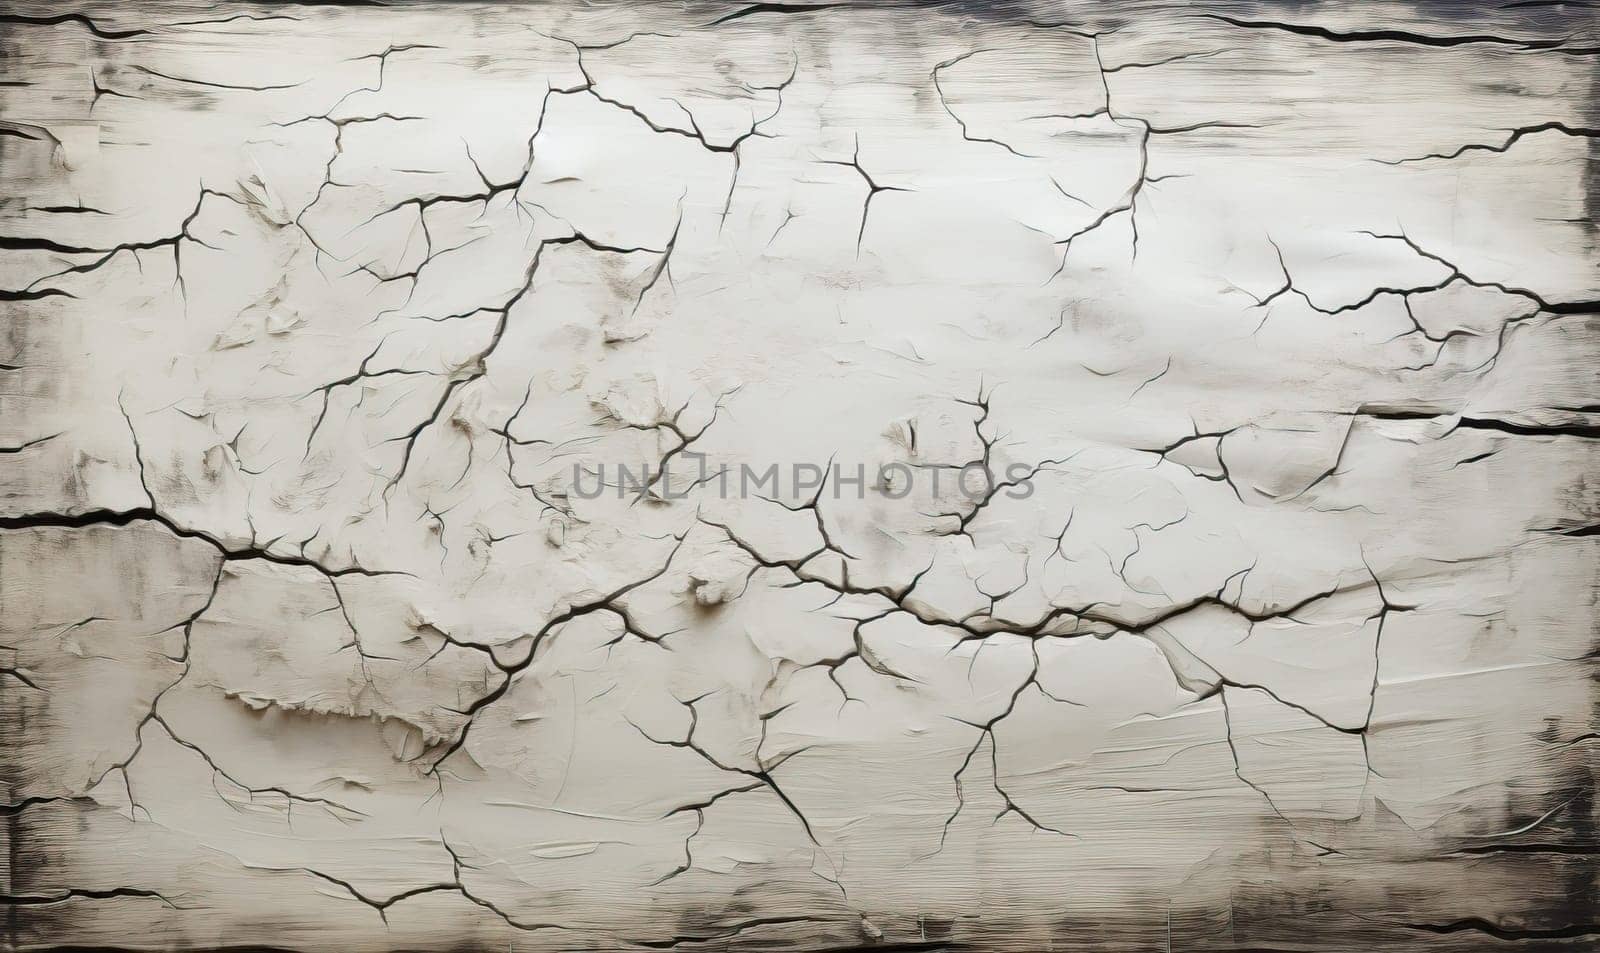 Аbstract creative texture background like cracked dry earth or plaster by Fischeron